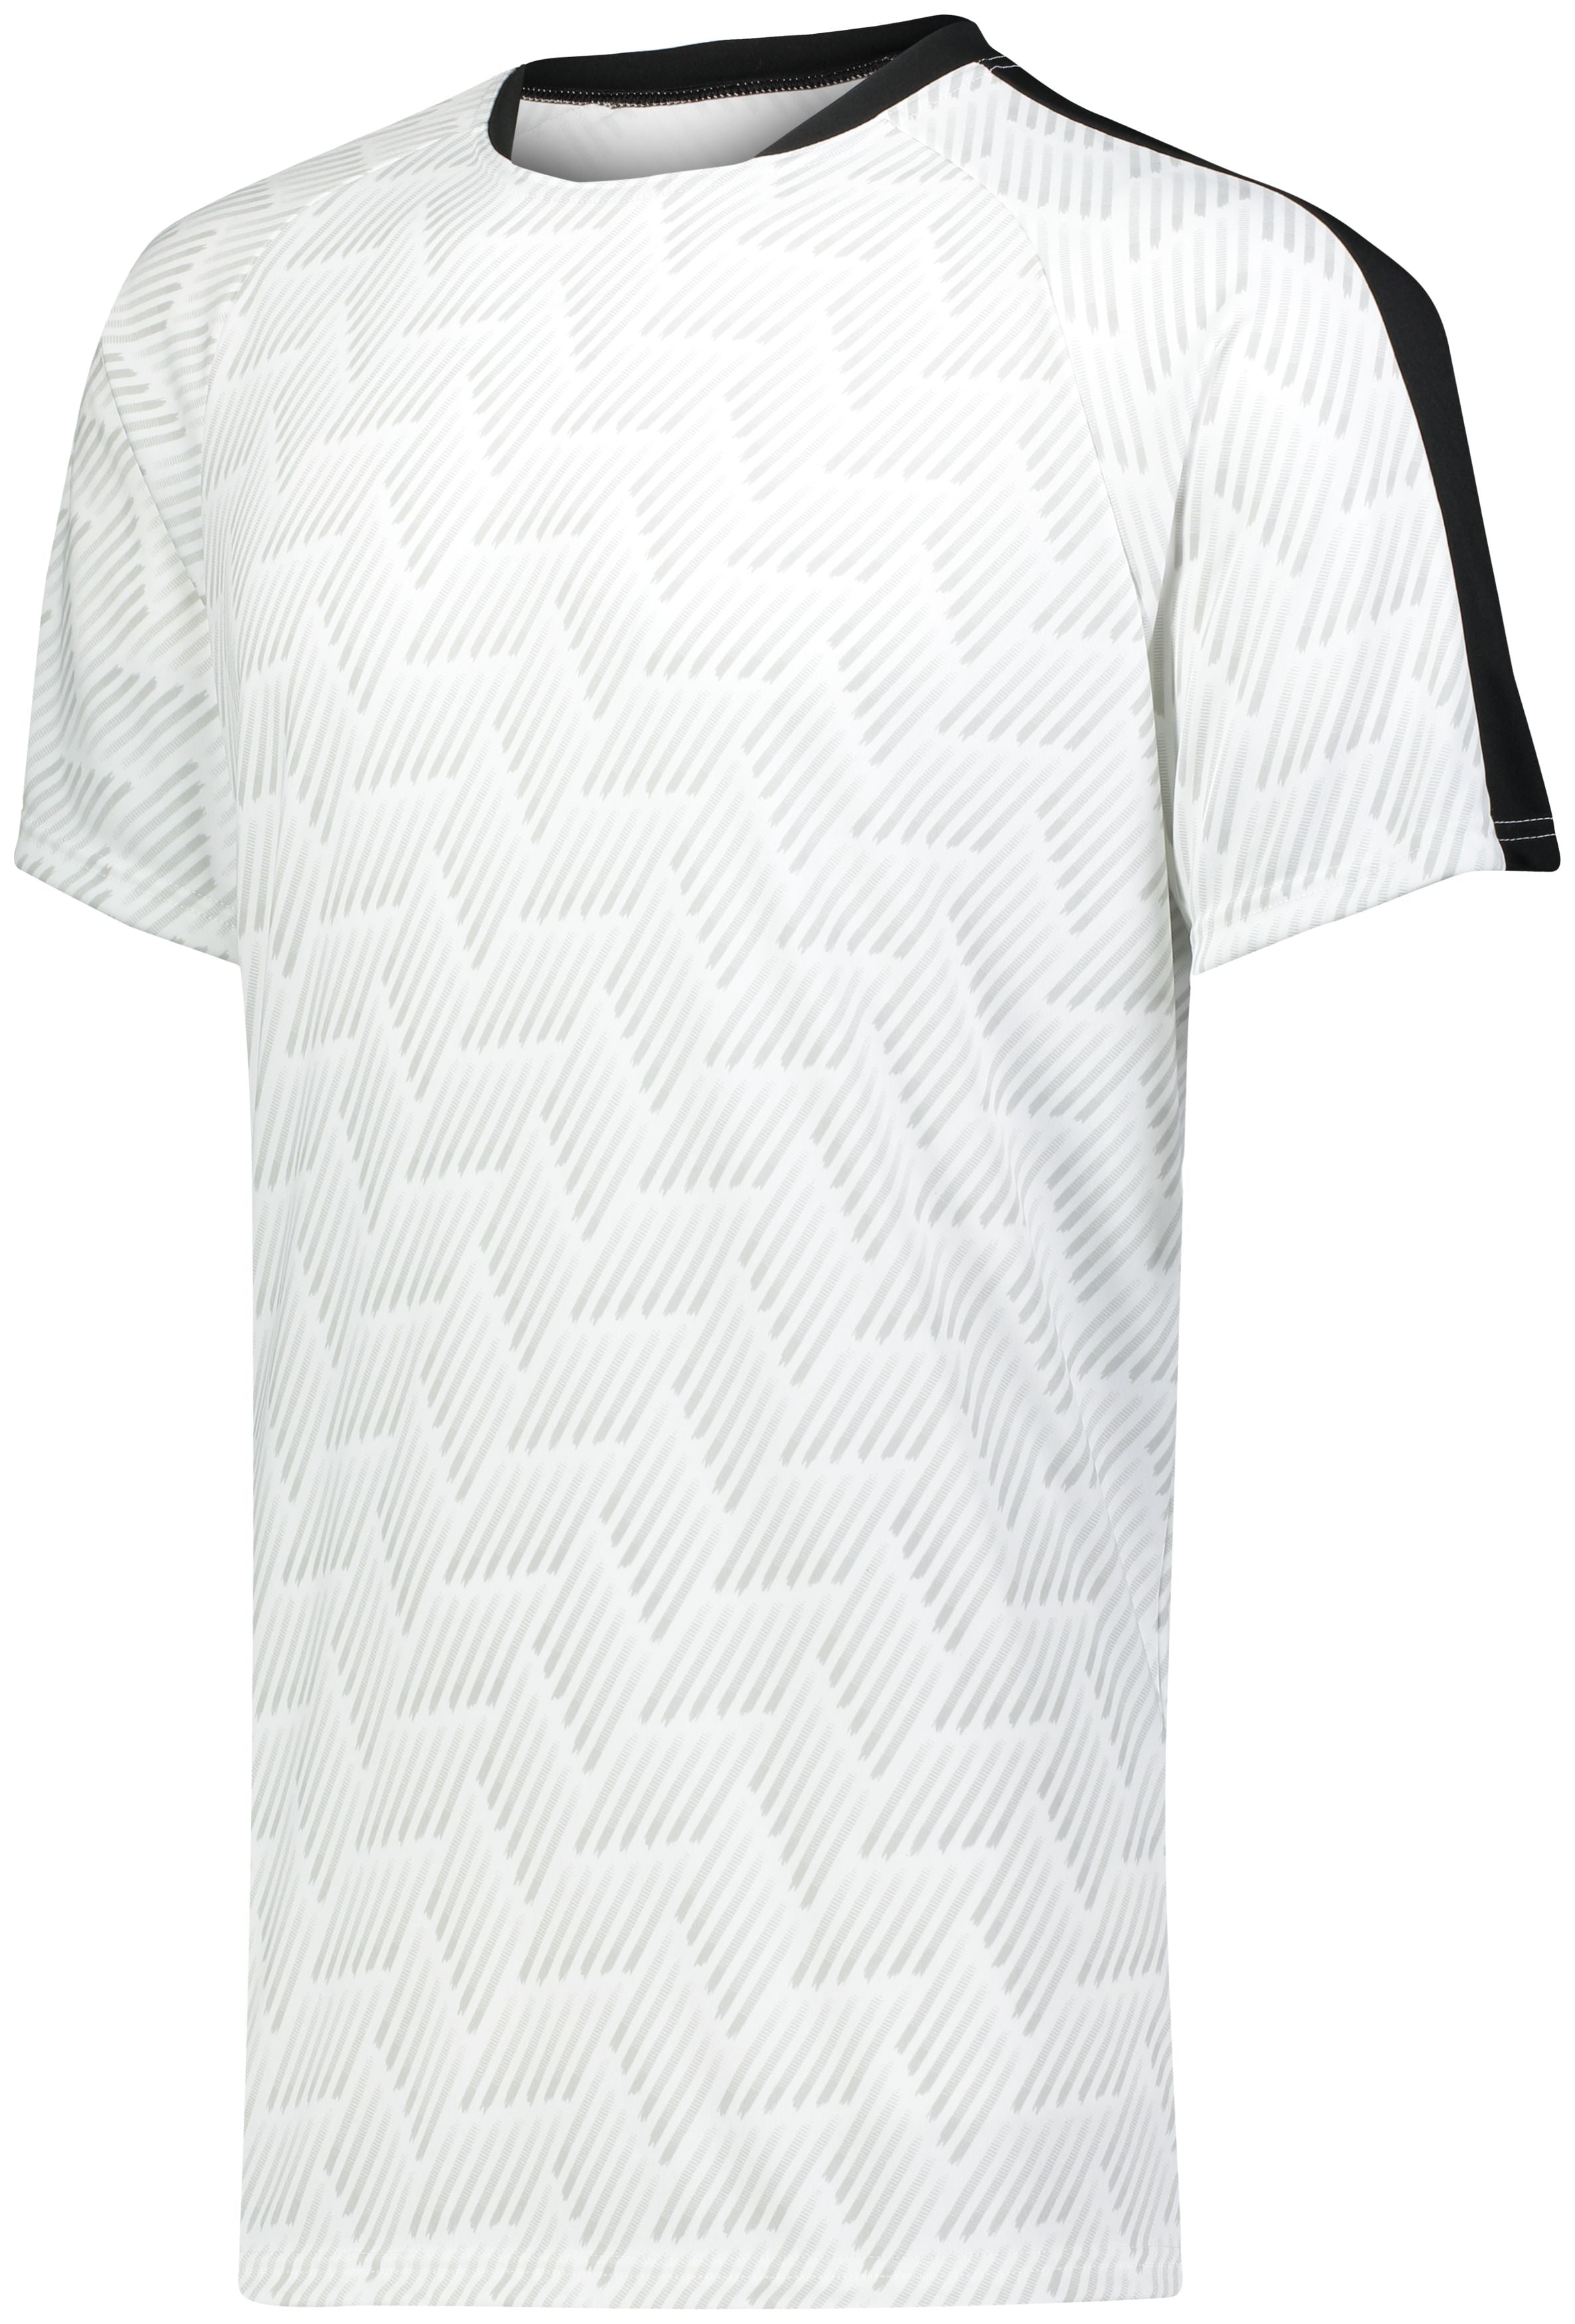 High 5 Hypervolt Jersey in White Print/Black  -Part of the Adult, Adult-Jersey, High5-Products, Soccer, Shirts, All-Sports-1 product lines at KanaleyCreations.com